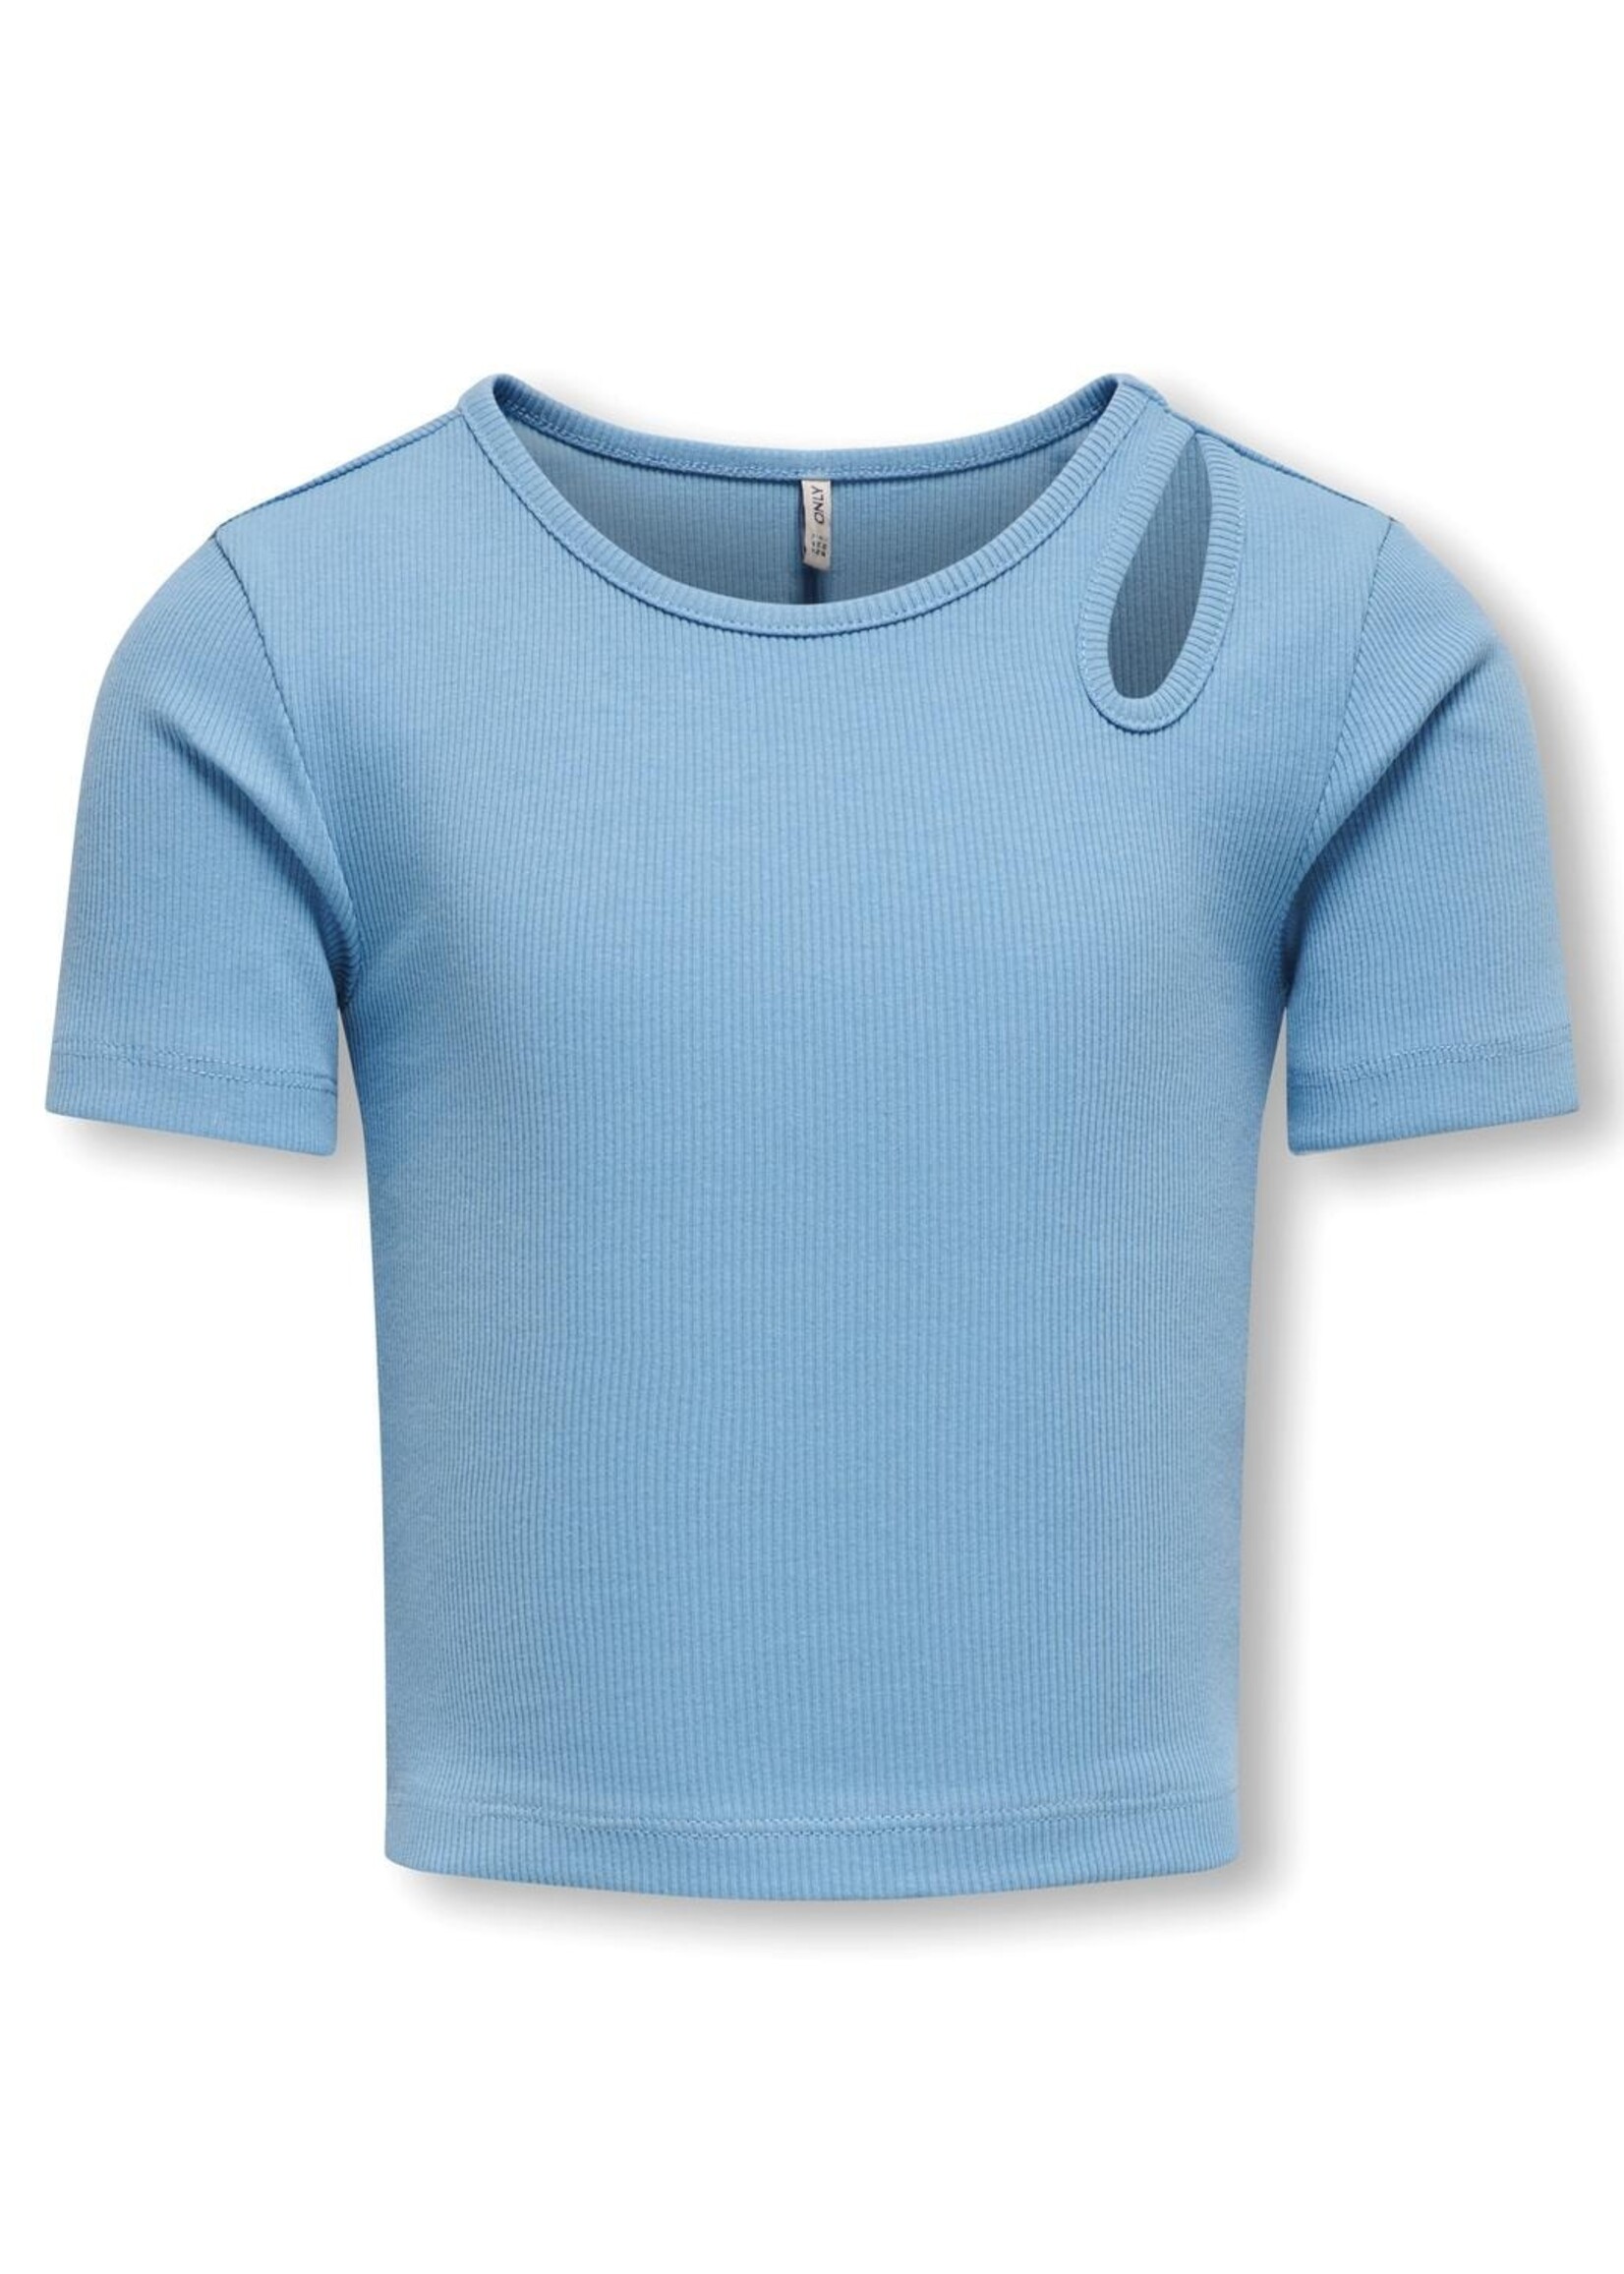 KIDS ONLY Nessa Cut Out Top Blissful Blue 15313690